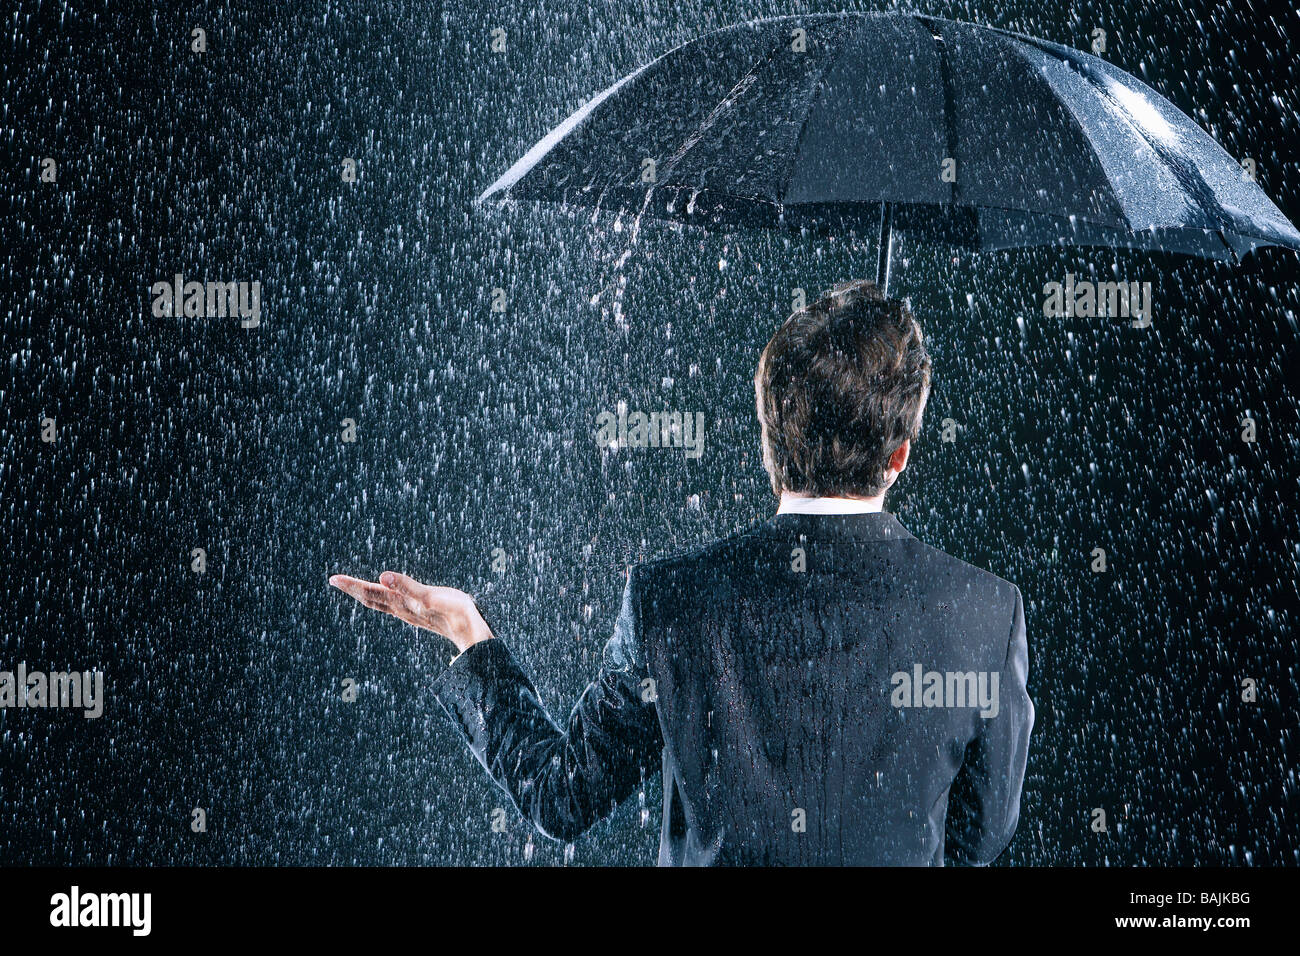 Businessman staying dry under umbrella during downpour, back view Stock Photo